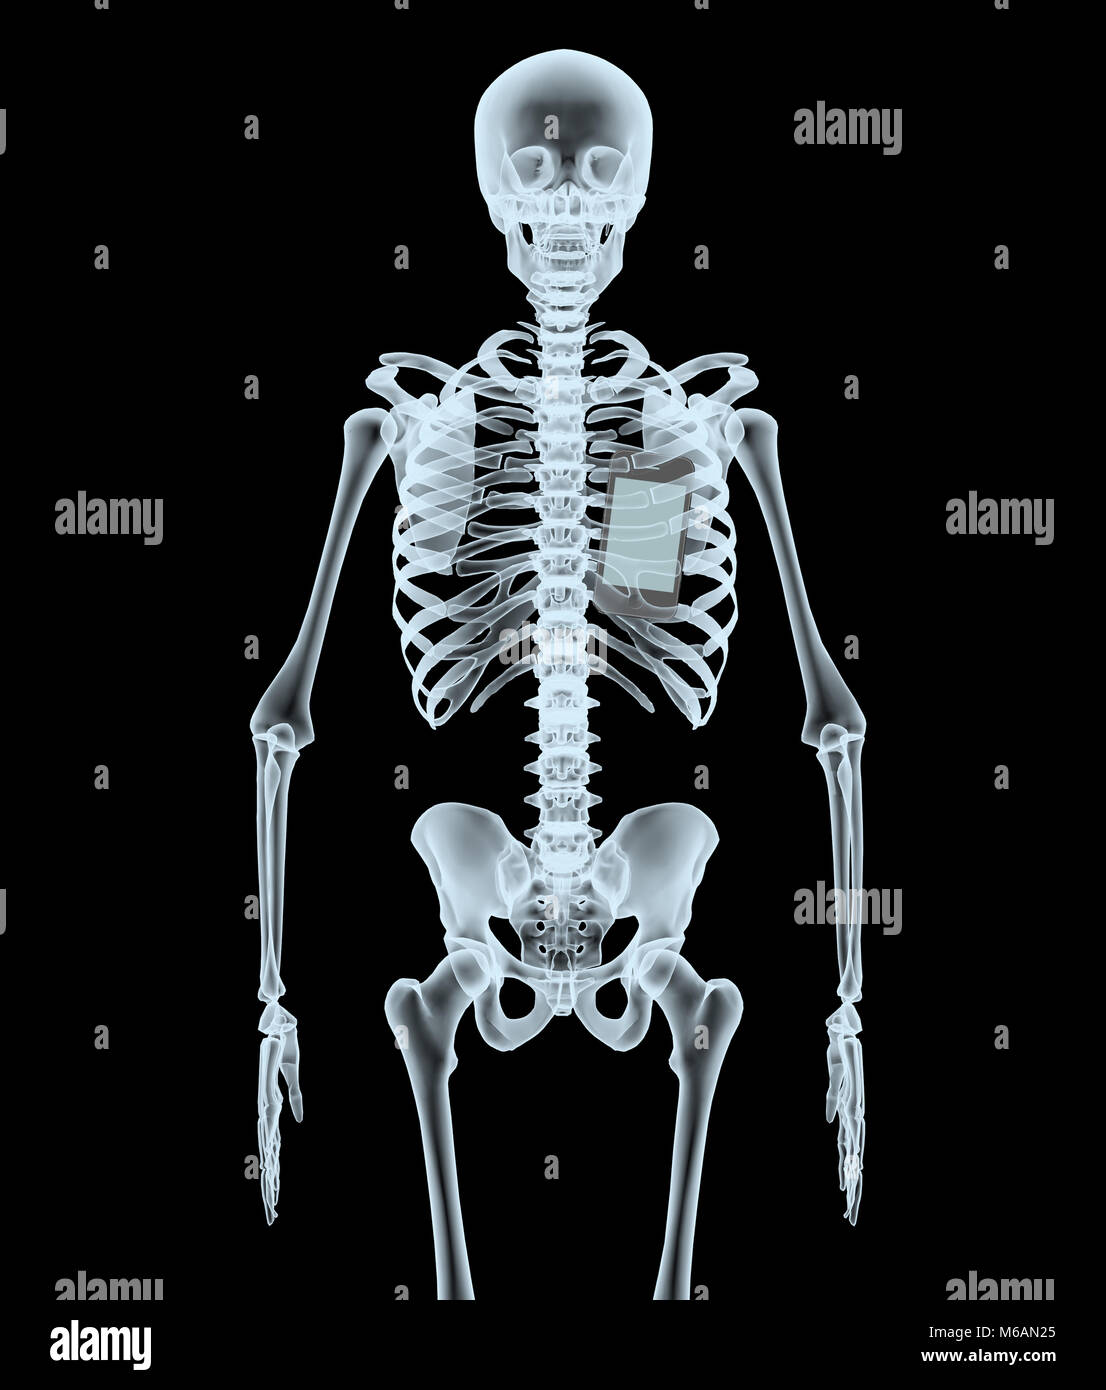 skeleton X-Ray displaying smartphone. isolated 3d illustration on a black background Stock Photo